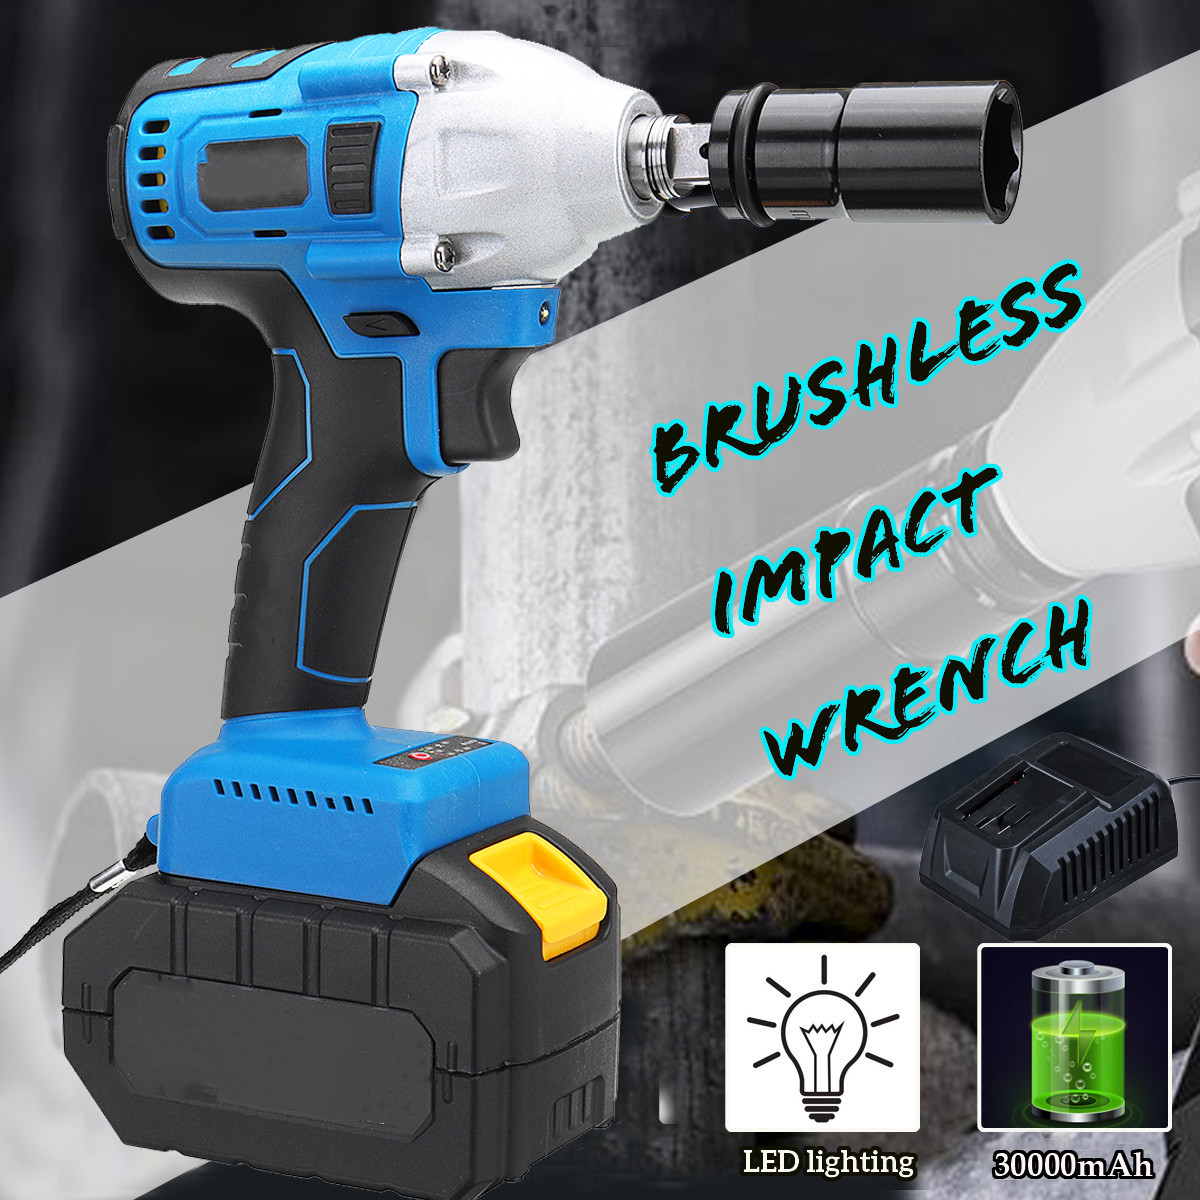 15000200002250030000-mAh-12-Inch-Cordless-Brushless-Electric-Impact-Wrench-Screwdriver-kit-with-2-Li-1413886-1